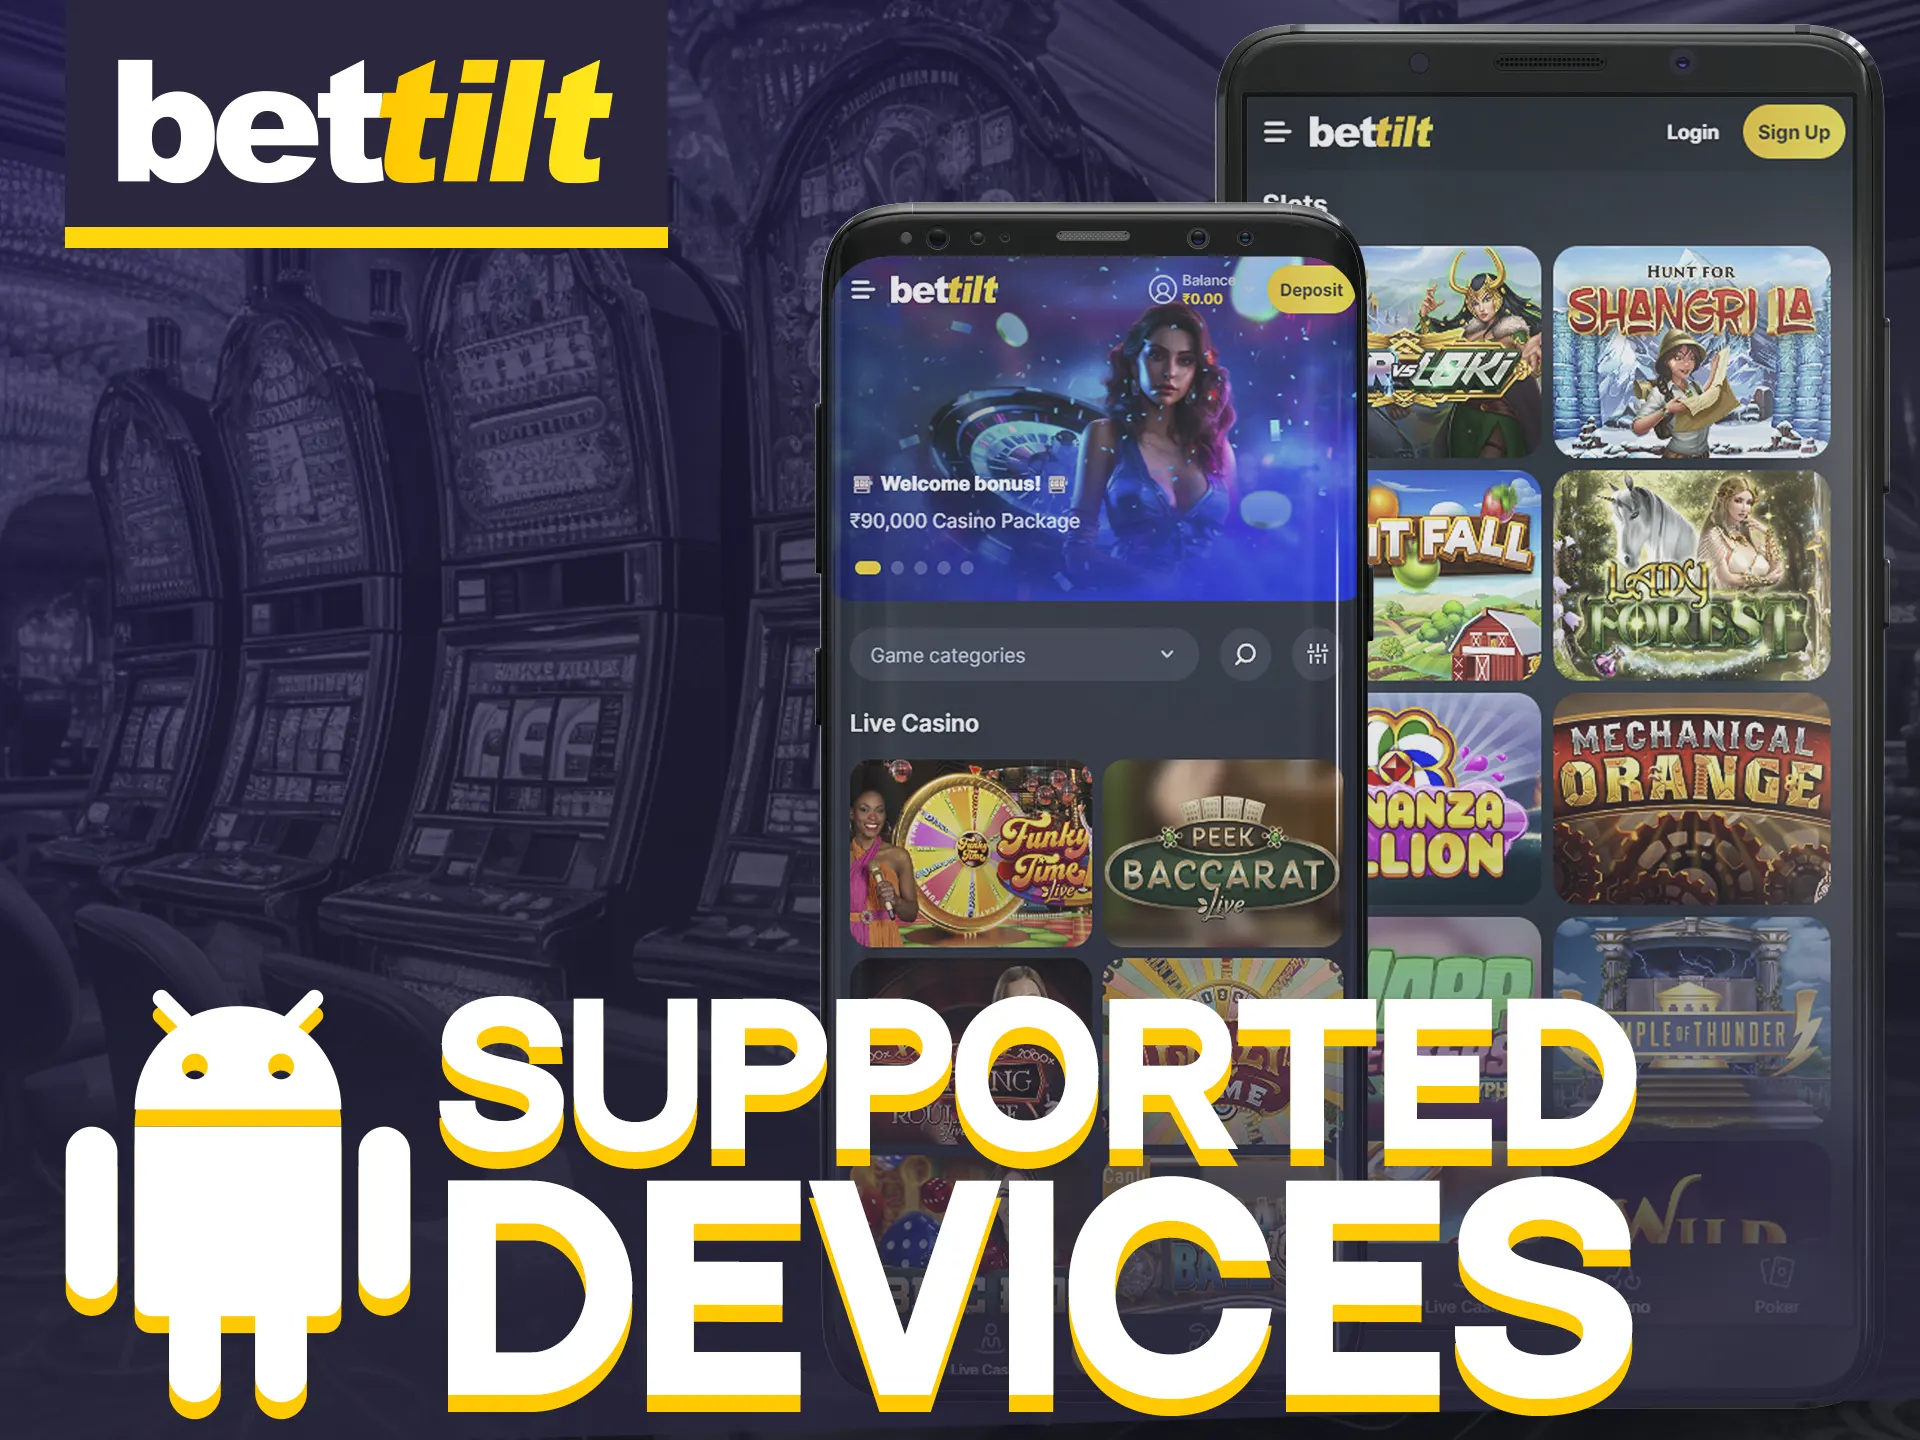 Bettilt app runs smoothly on various Android models.